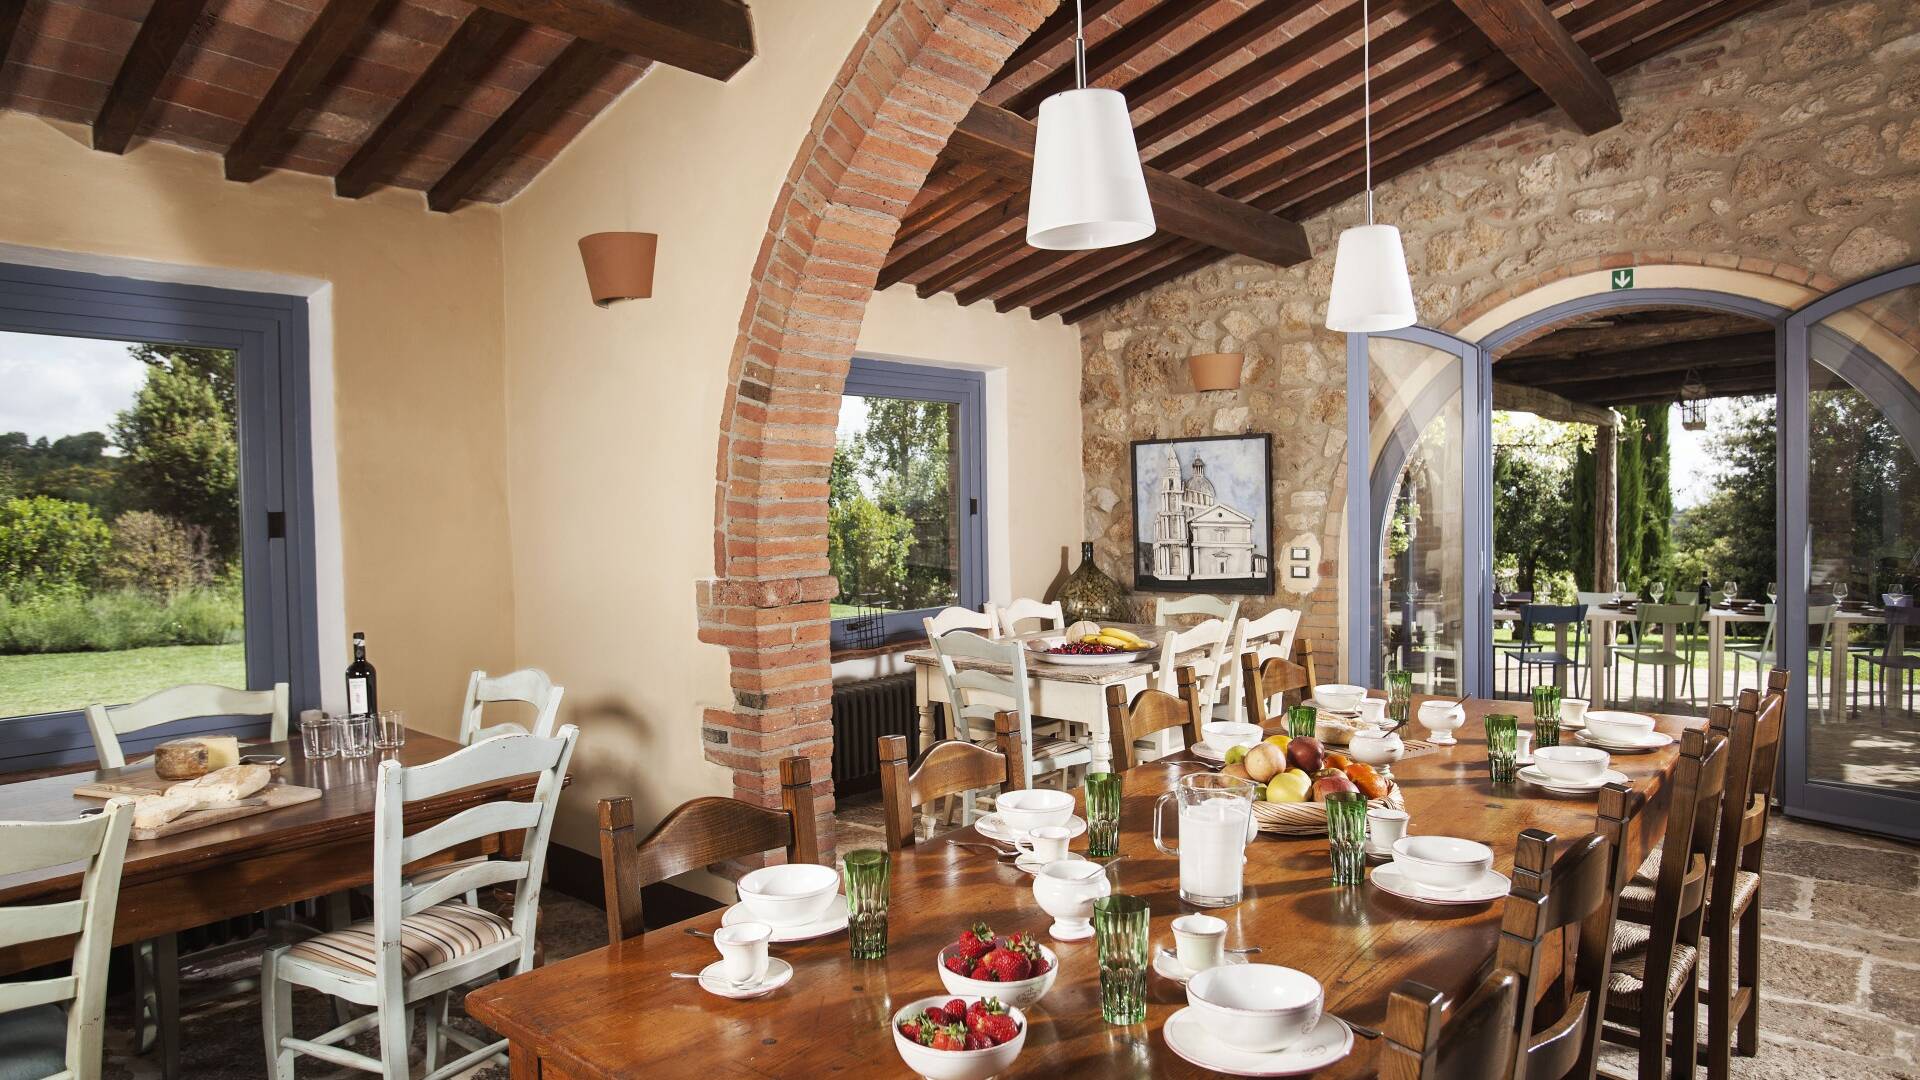 dining room with typical Tuscan style